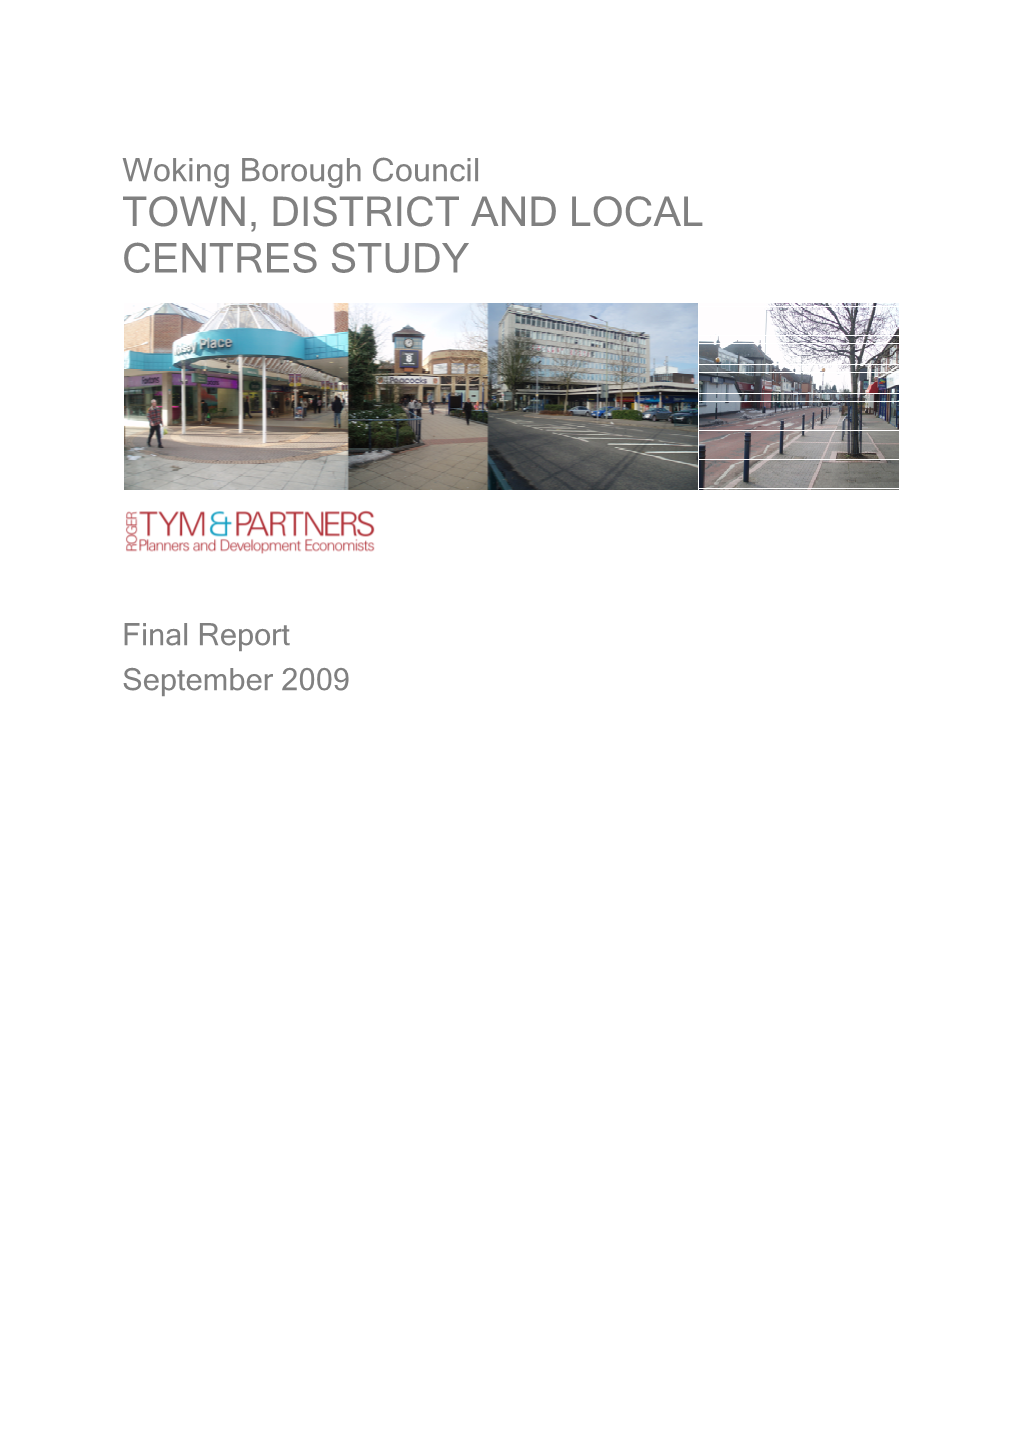 Download the Town District and Local Centres Study Report PDF File